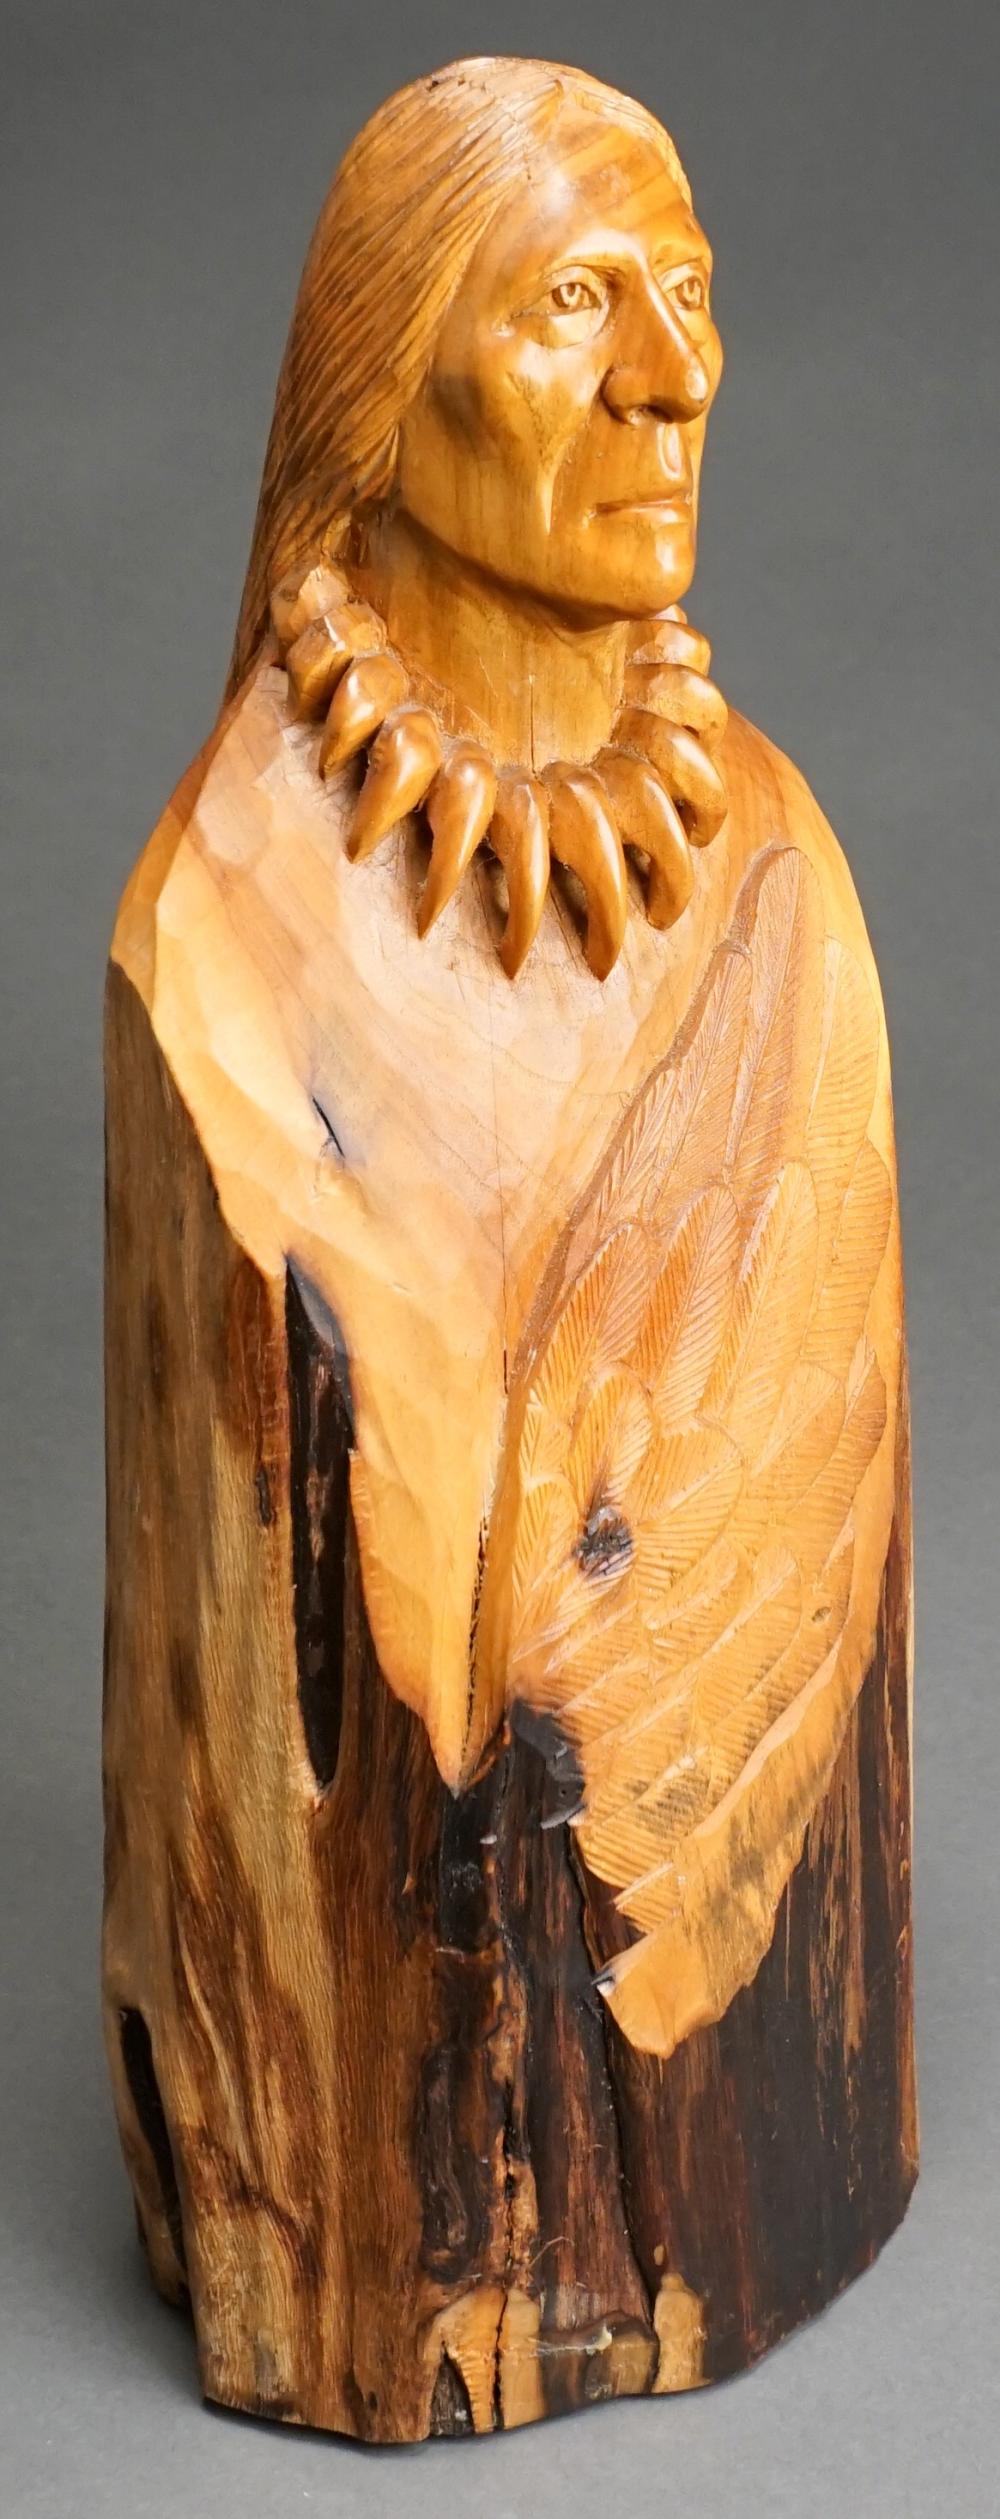 CARVED WOOD FIGURE OF AN AMERICAN